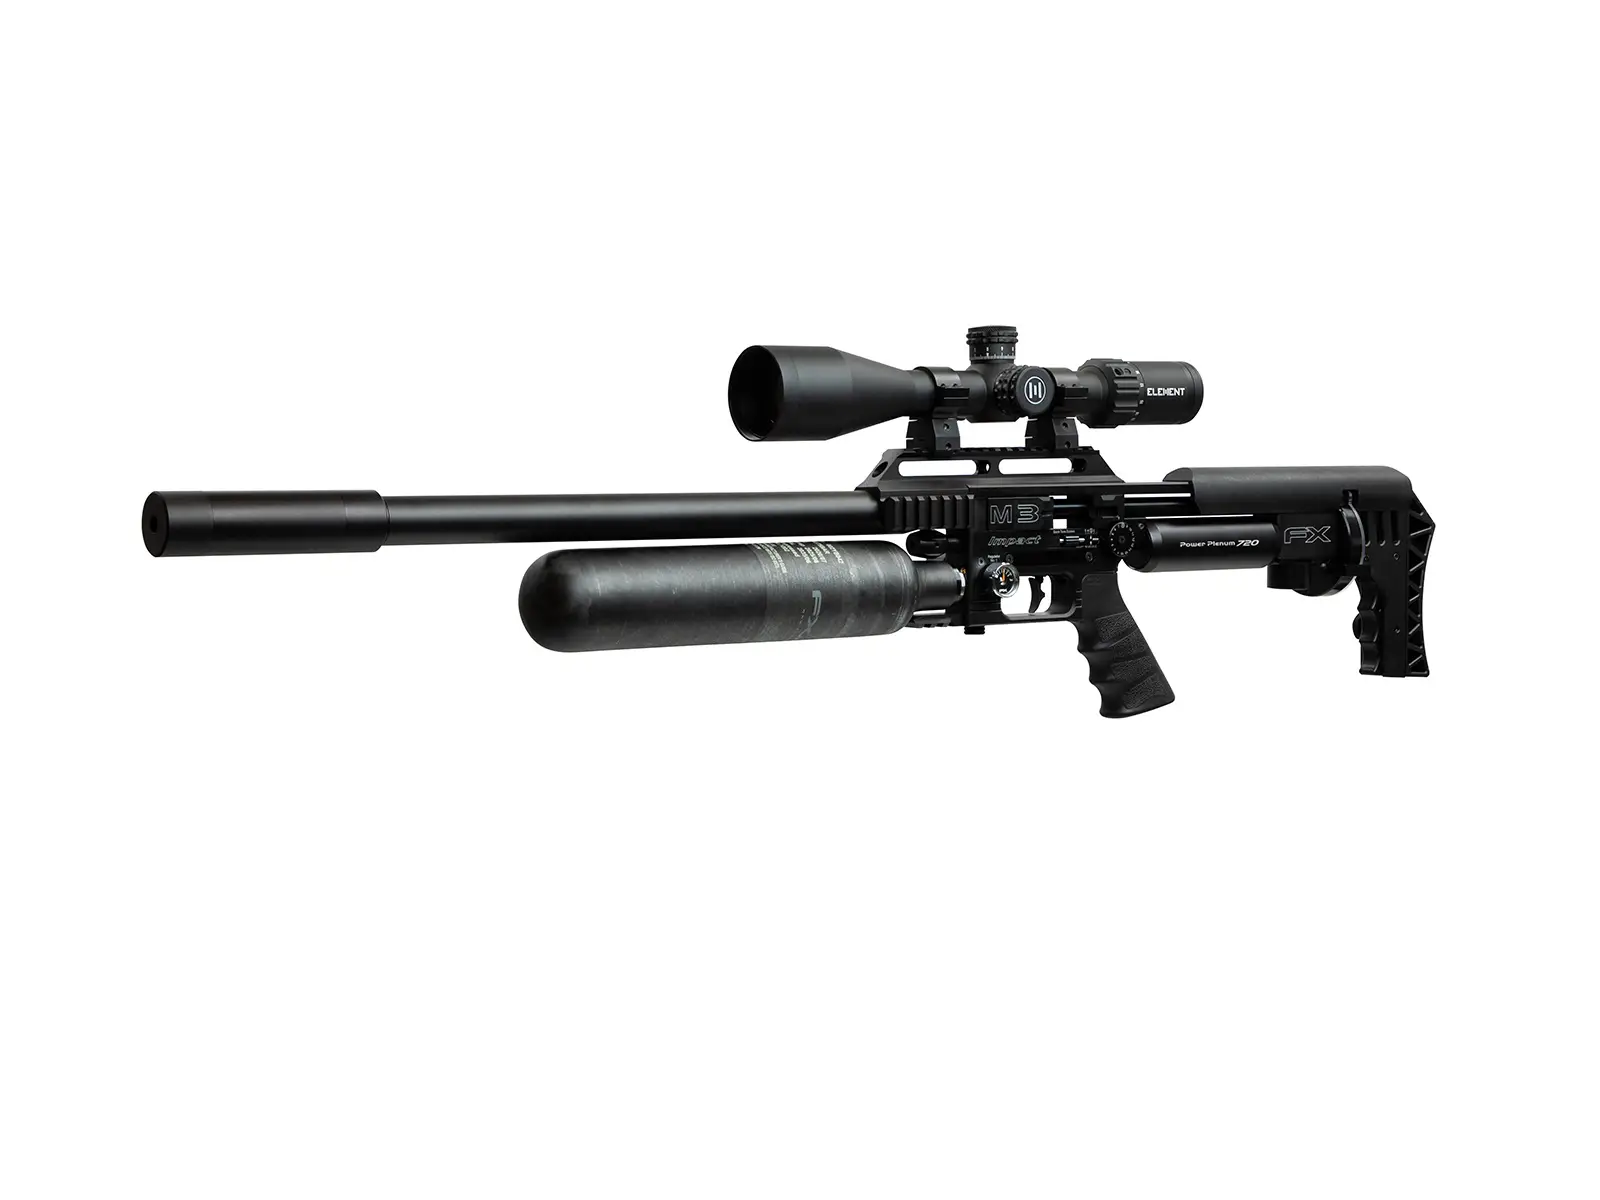 f1 Best .22 Air Rifles - Top 10 fantastic guns for the money (Reviews and Buying Guide 2023)